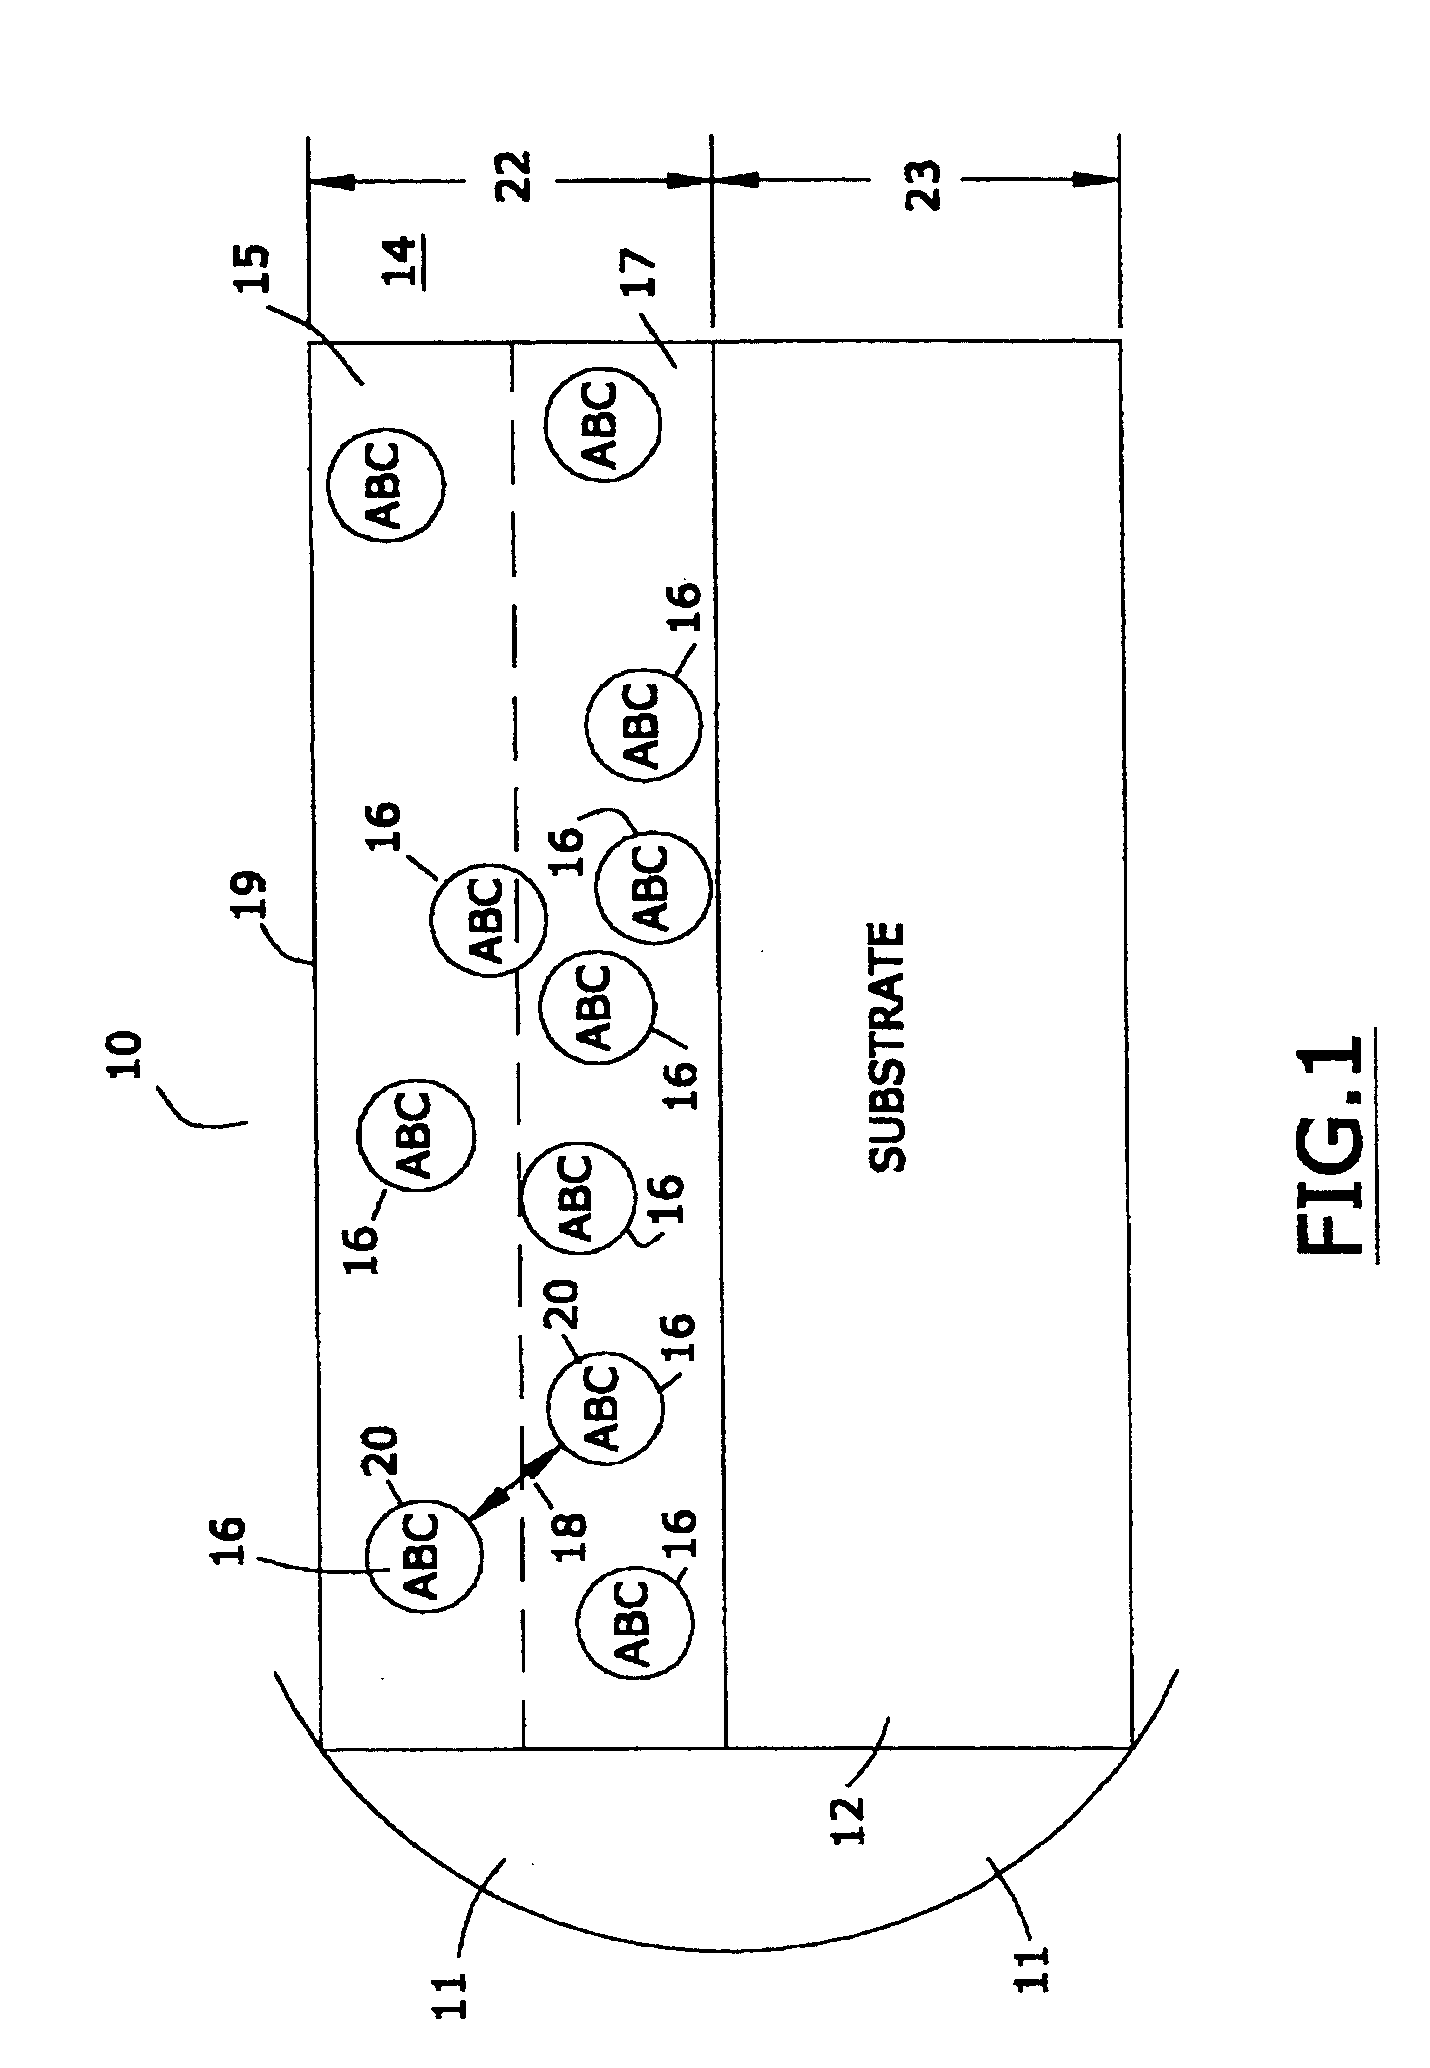 Markers for visualizing interventional medical devices